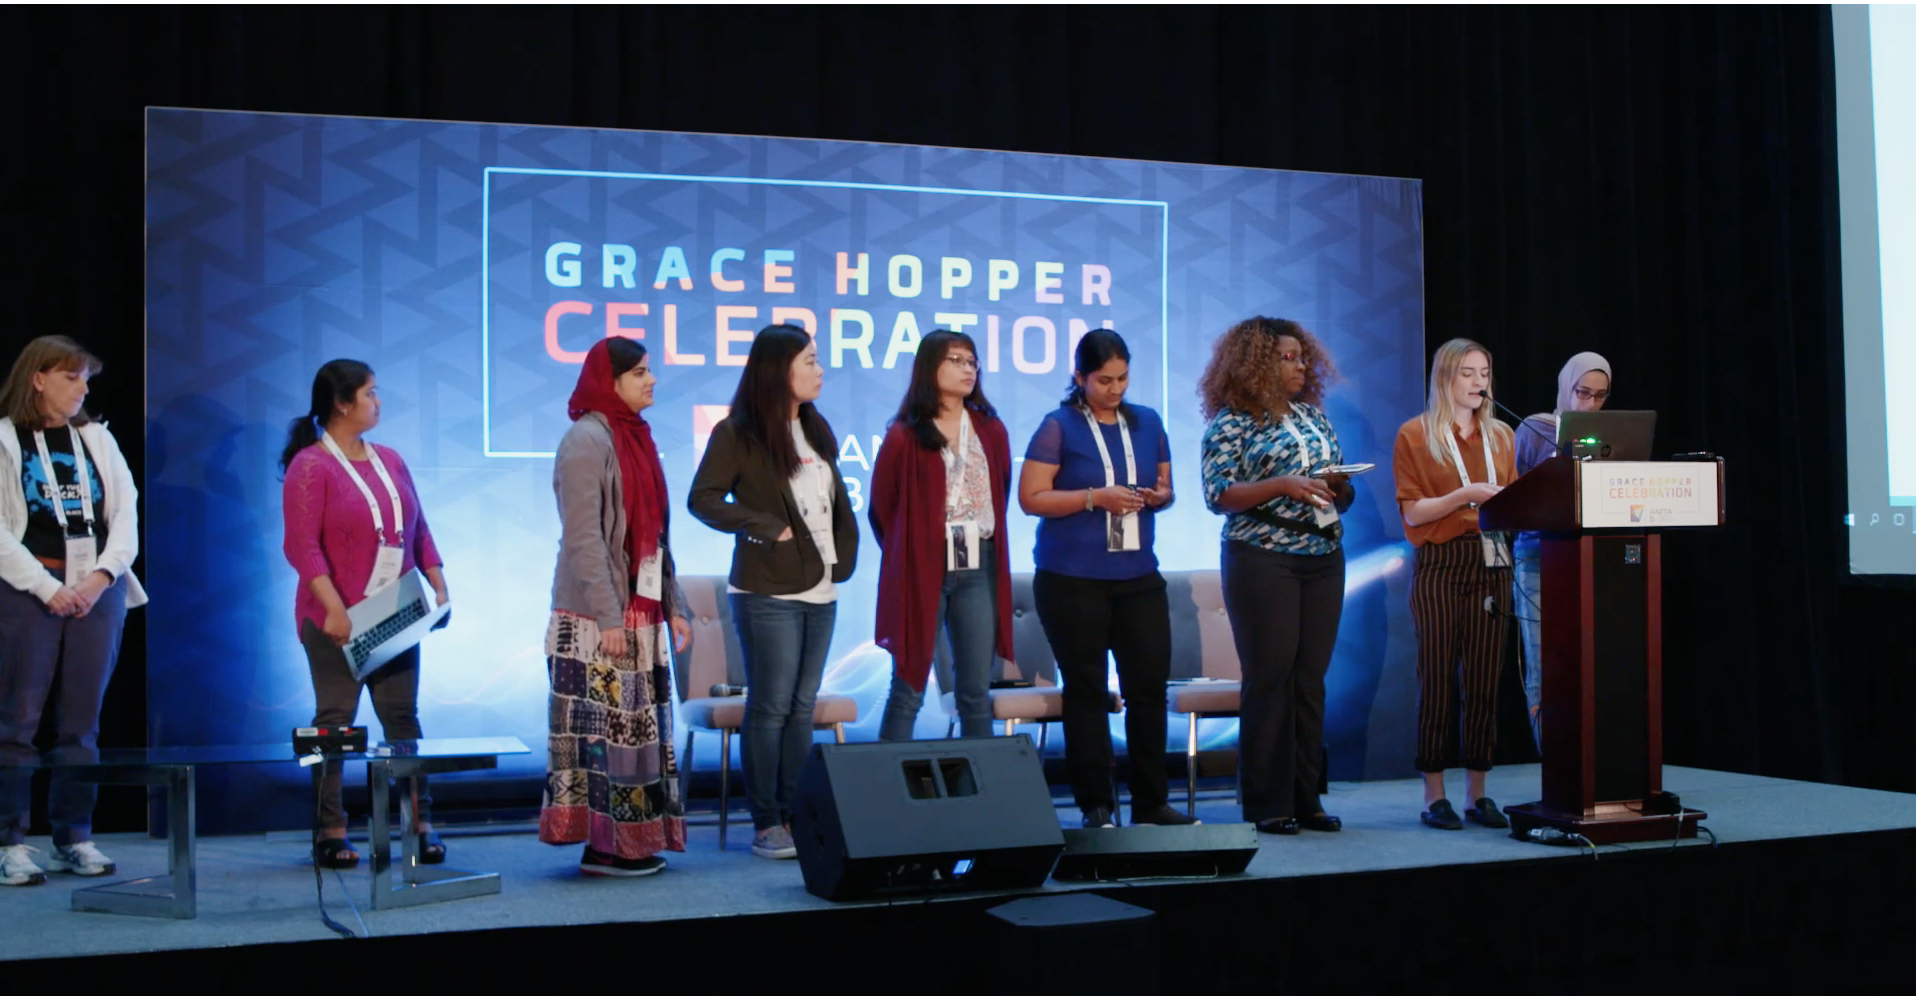 Presenting at the Grace Hopper Hackathon in 2018.